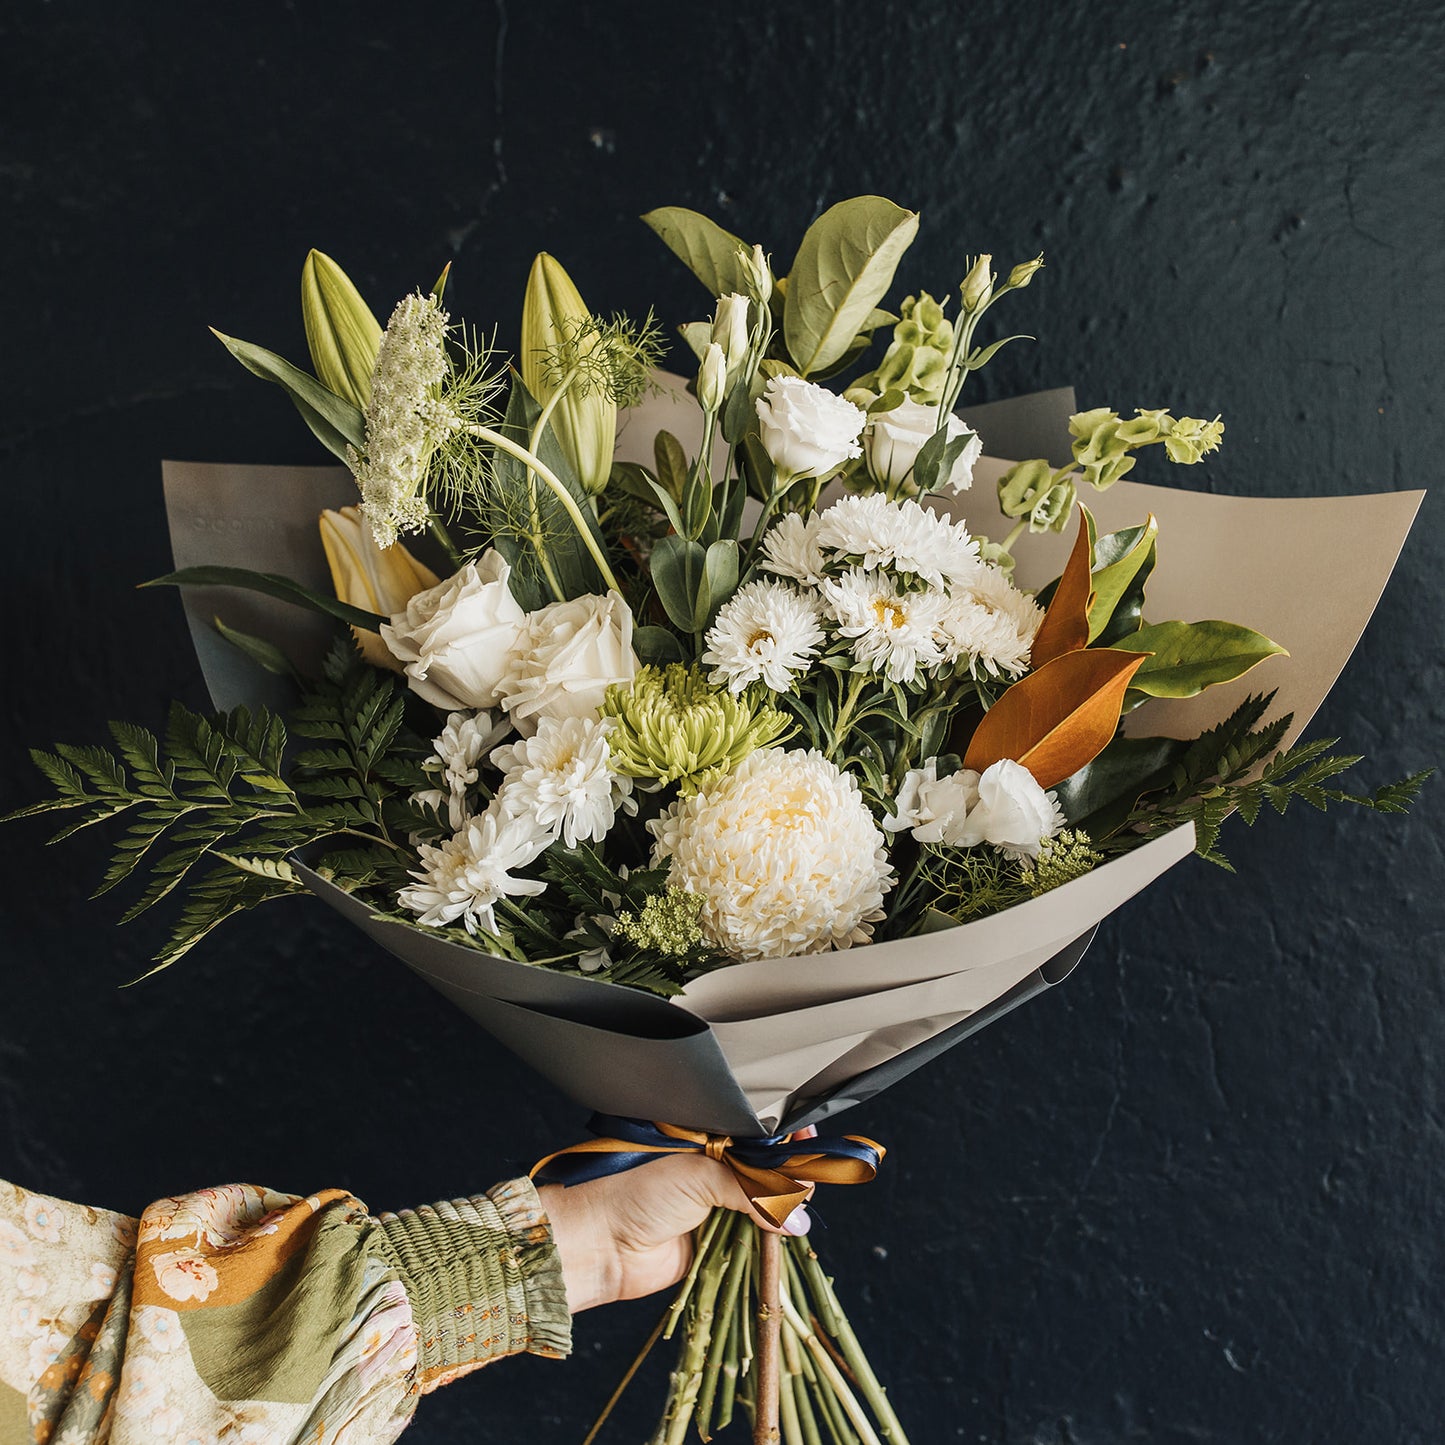 Clare florist with local delivery. Mixed bouquet of flowers in neutral tones of white and green including lillies, lisianthus, roses and chrysanthemums. 